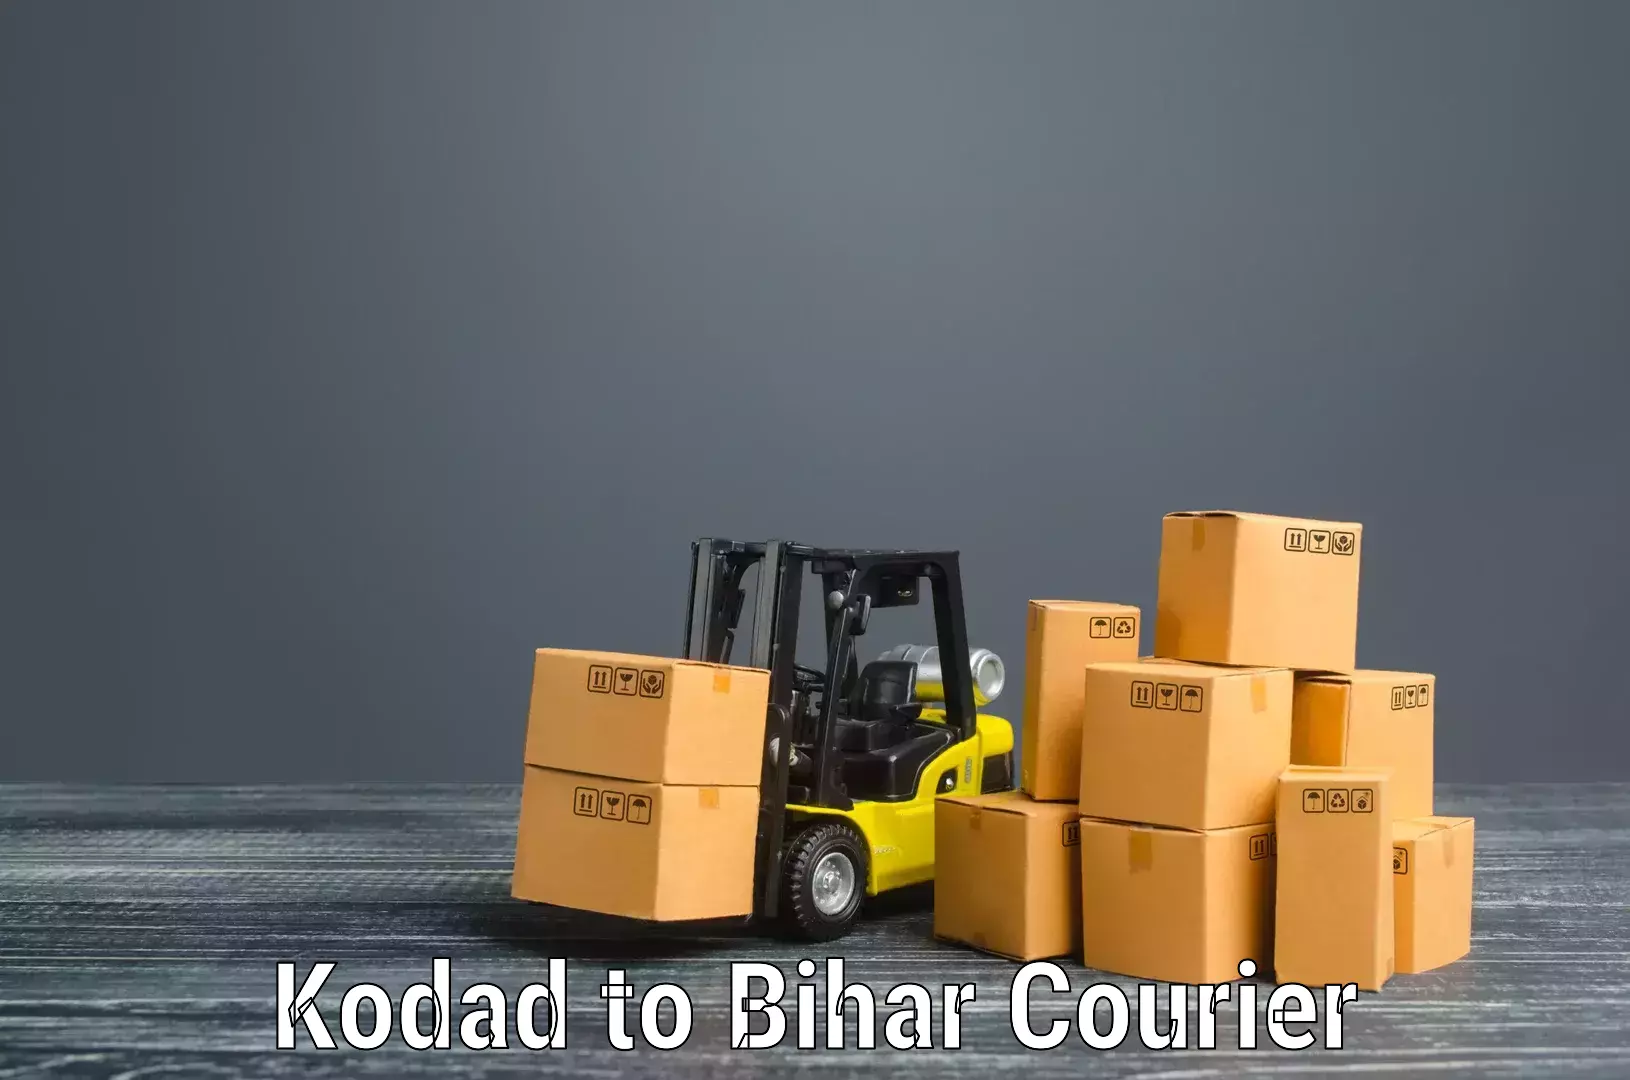 Furniture shipping services in Kodad to Biraul